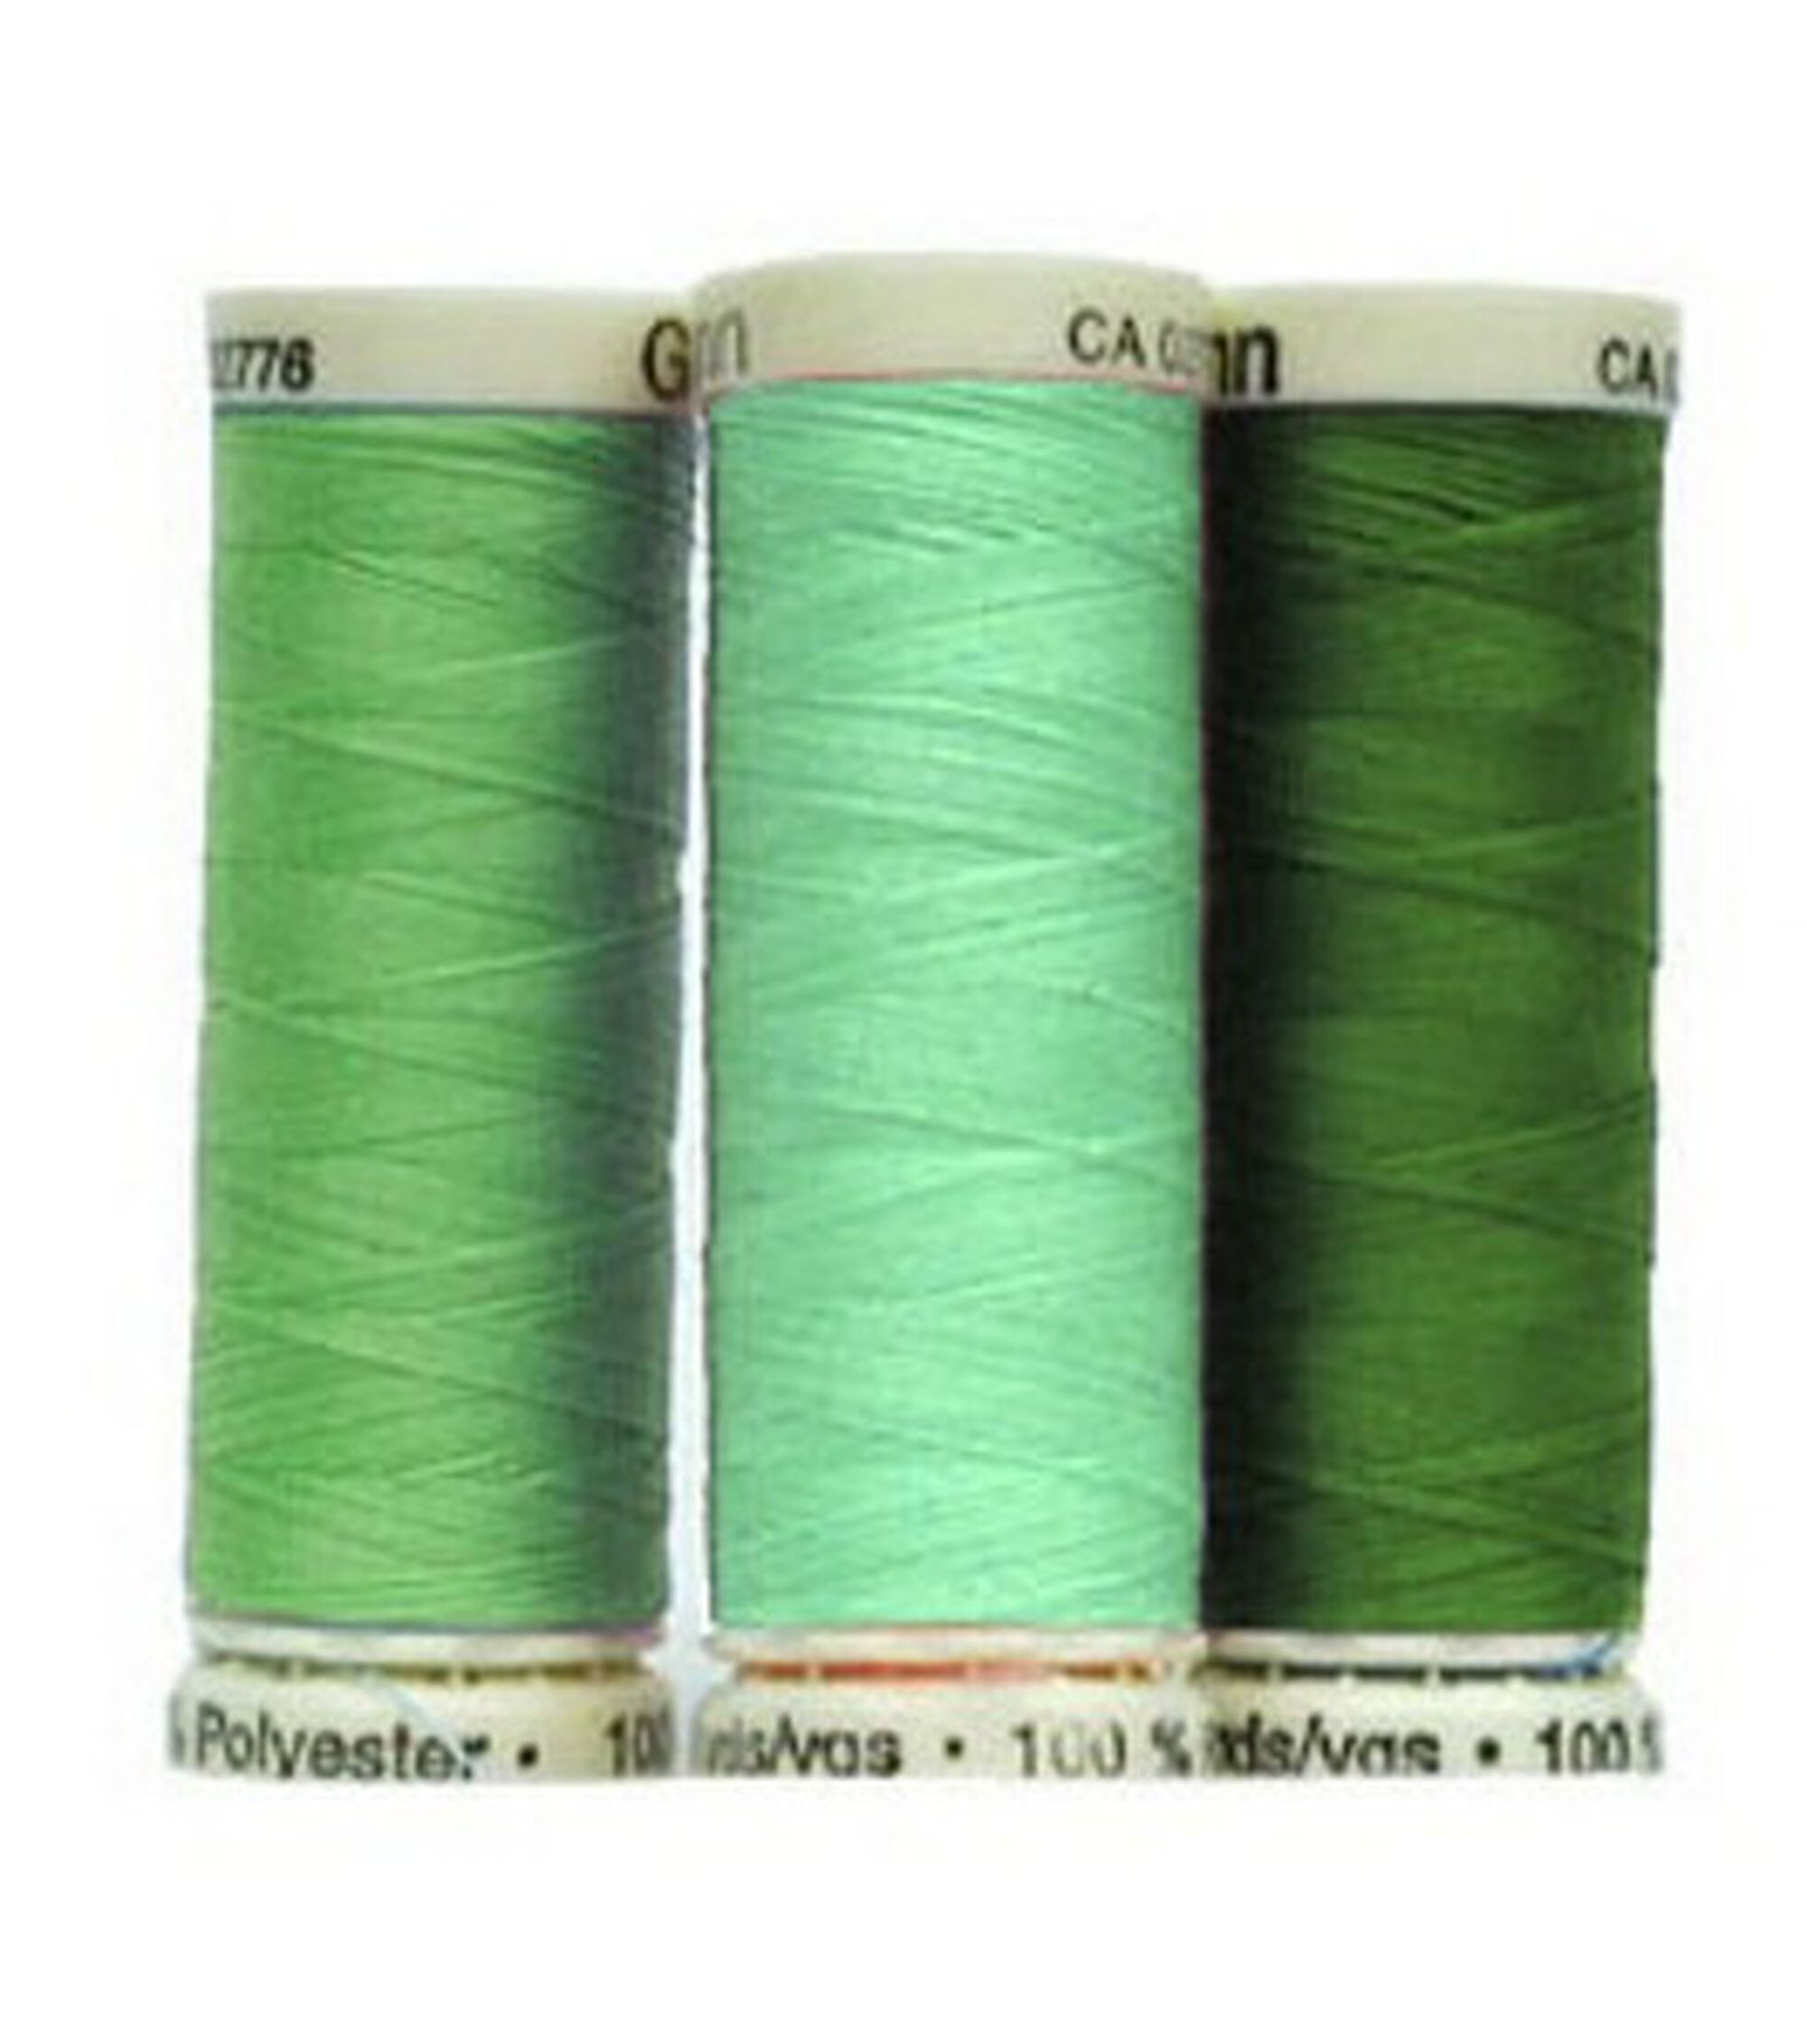 3 NEW different Green colors GUTERMANN 100% polyester thread 110 yard spools 